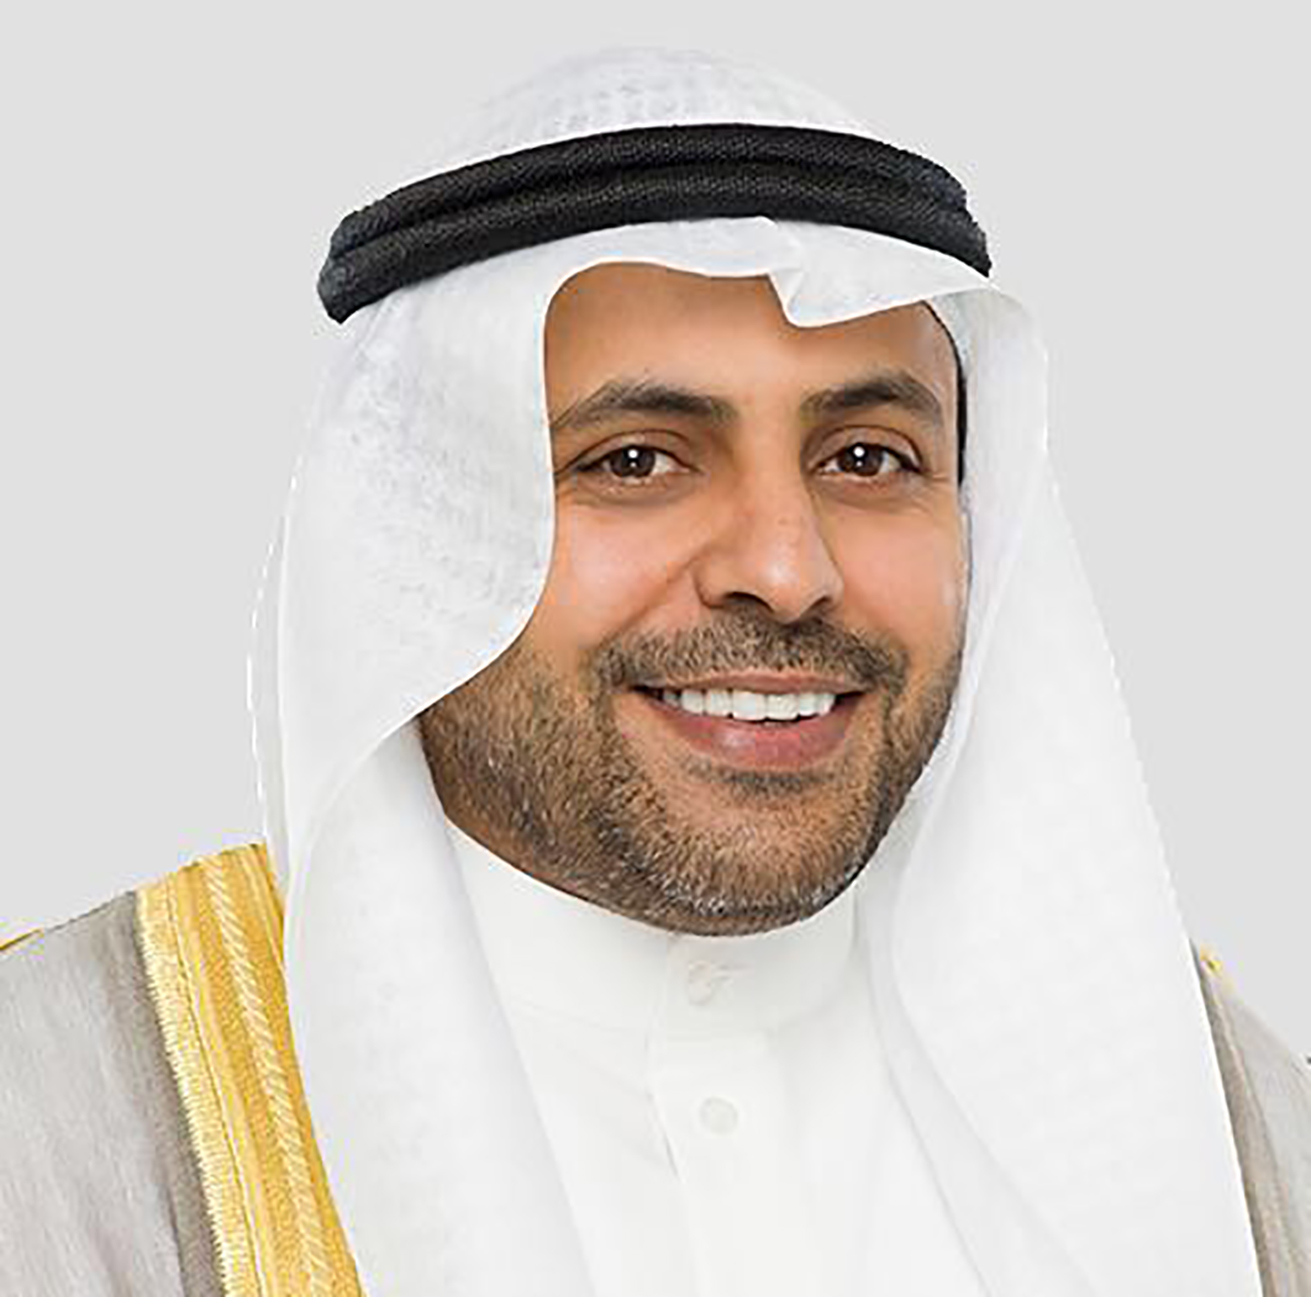 Kuwait's Minister of Awqaf and Islamic Affairs, Minister of State for Municipality Affairs Mohammad Al-Jabri